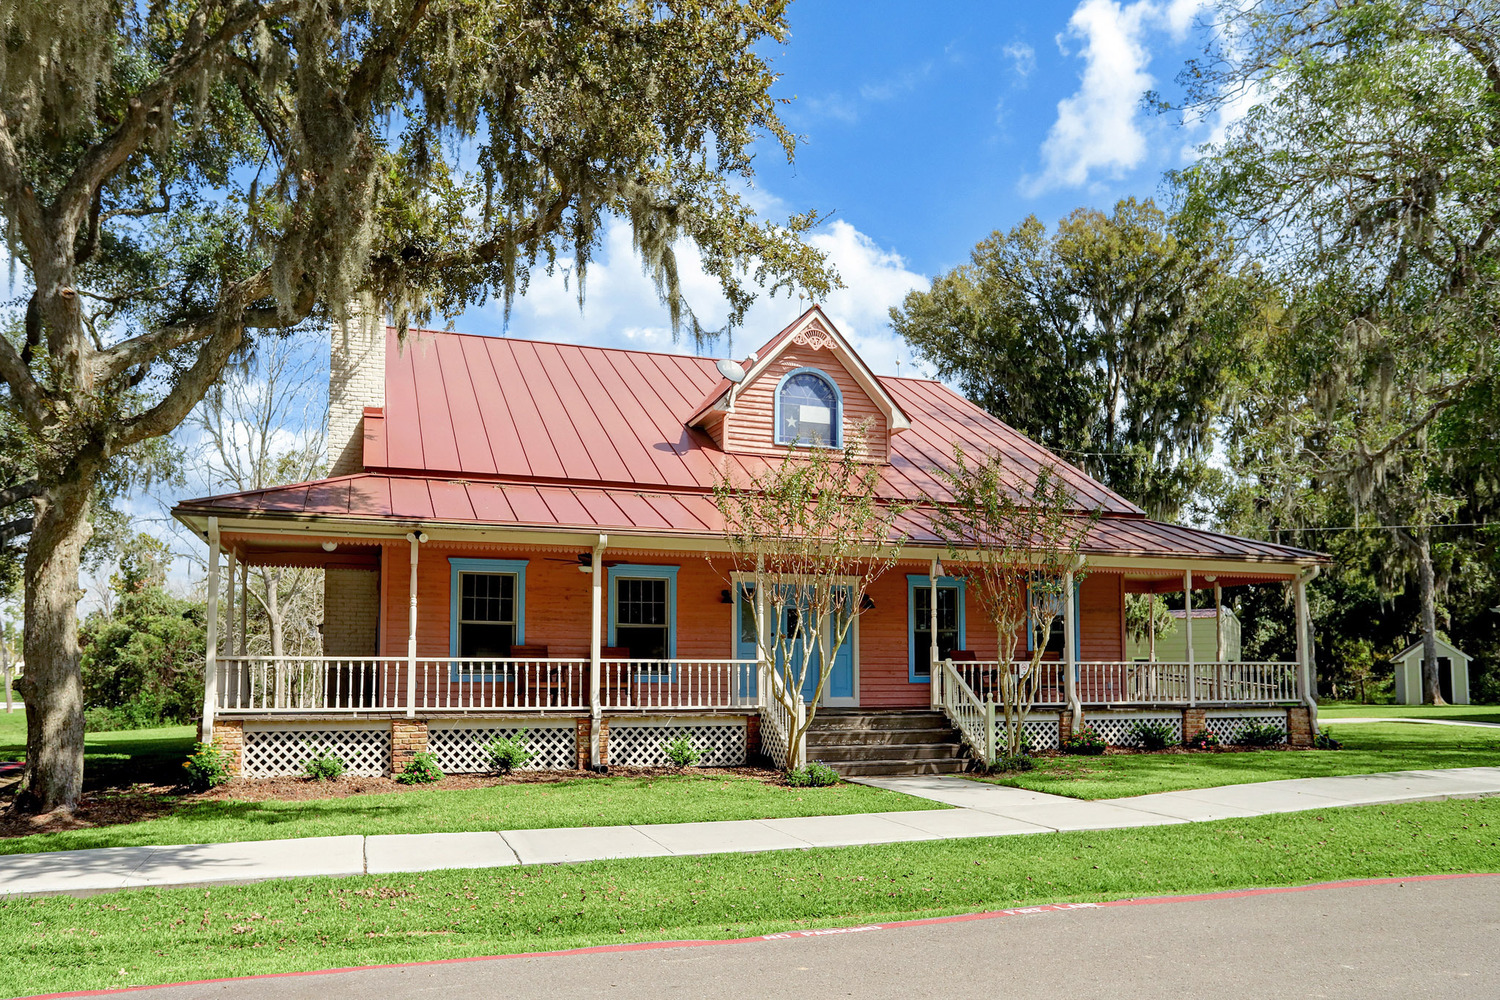 Gallery Photo of The Bluebonnet House is our Detox building. With 24/7 nursing staff and two full time medical directors our residents get around the clock care.